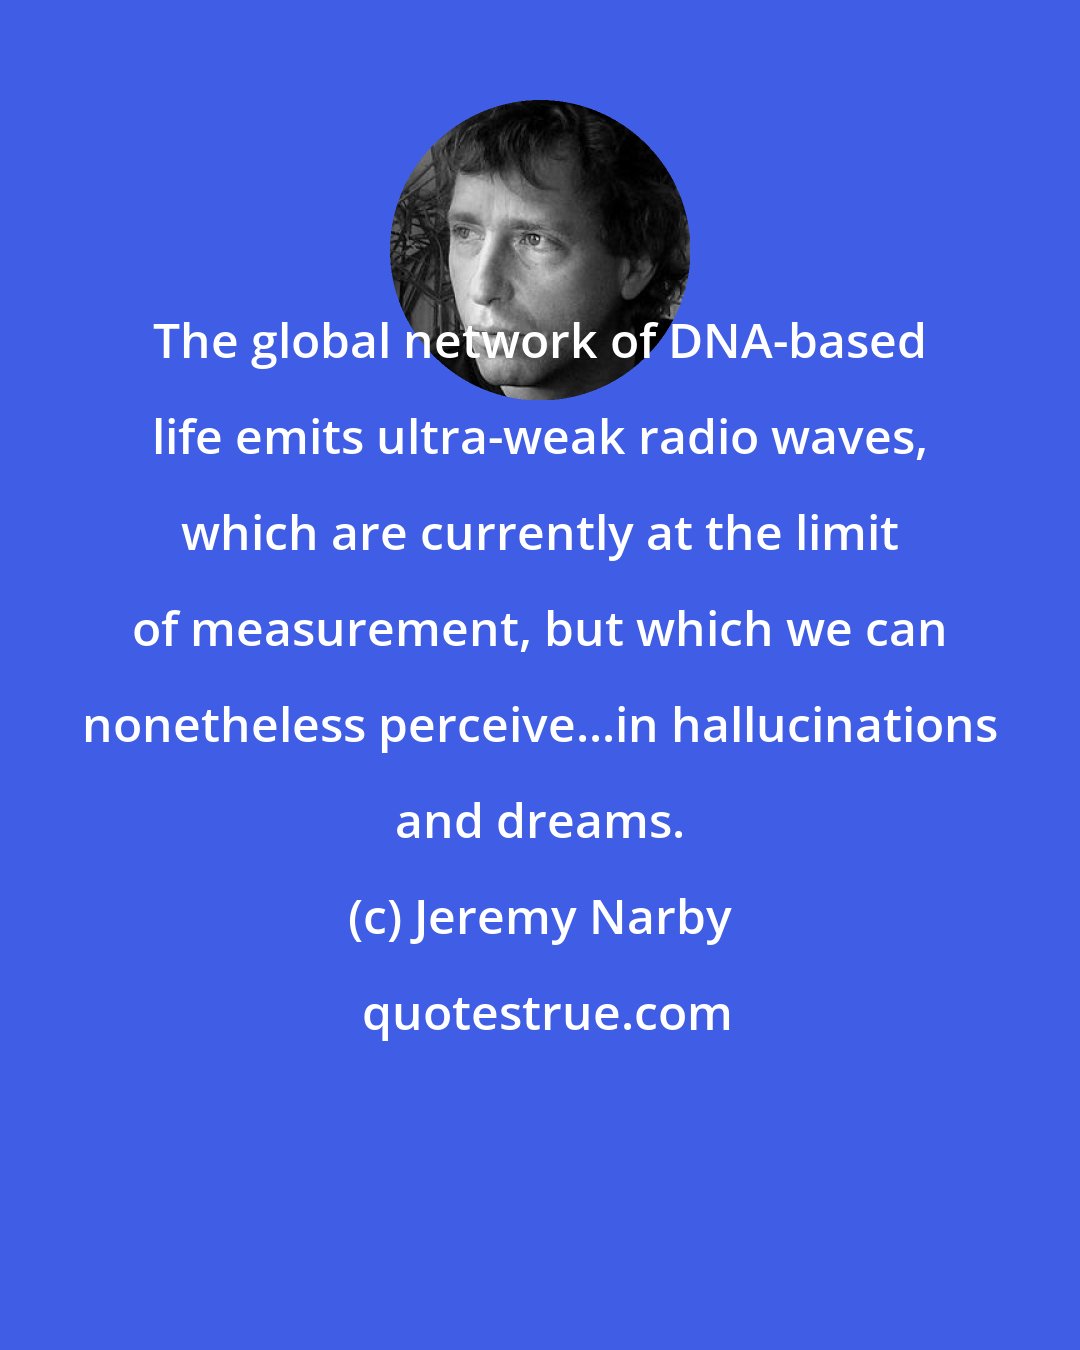 Jeremy Narby: The global network of DNA-based life emits ultra-weak radio waves, which are currently at the limit of measurement, but which we can nonetheless perceive...in hallucinations and dreams.